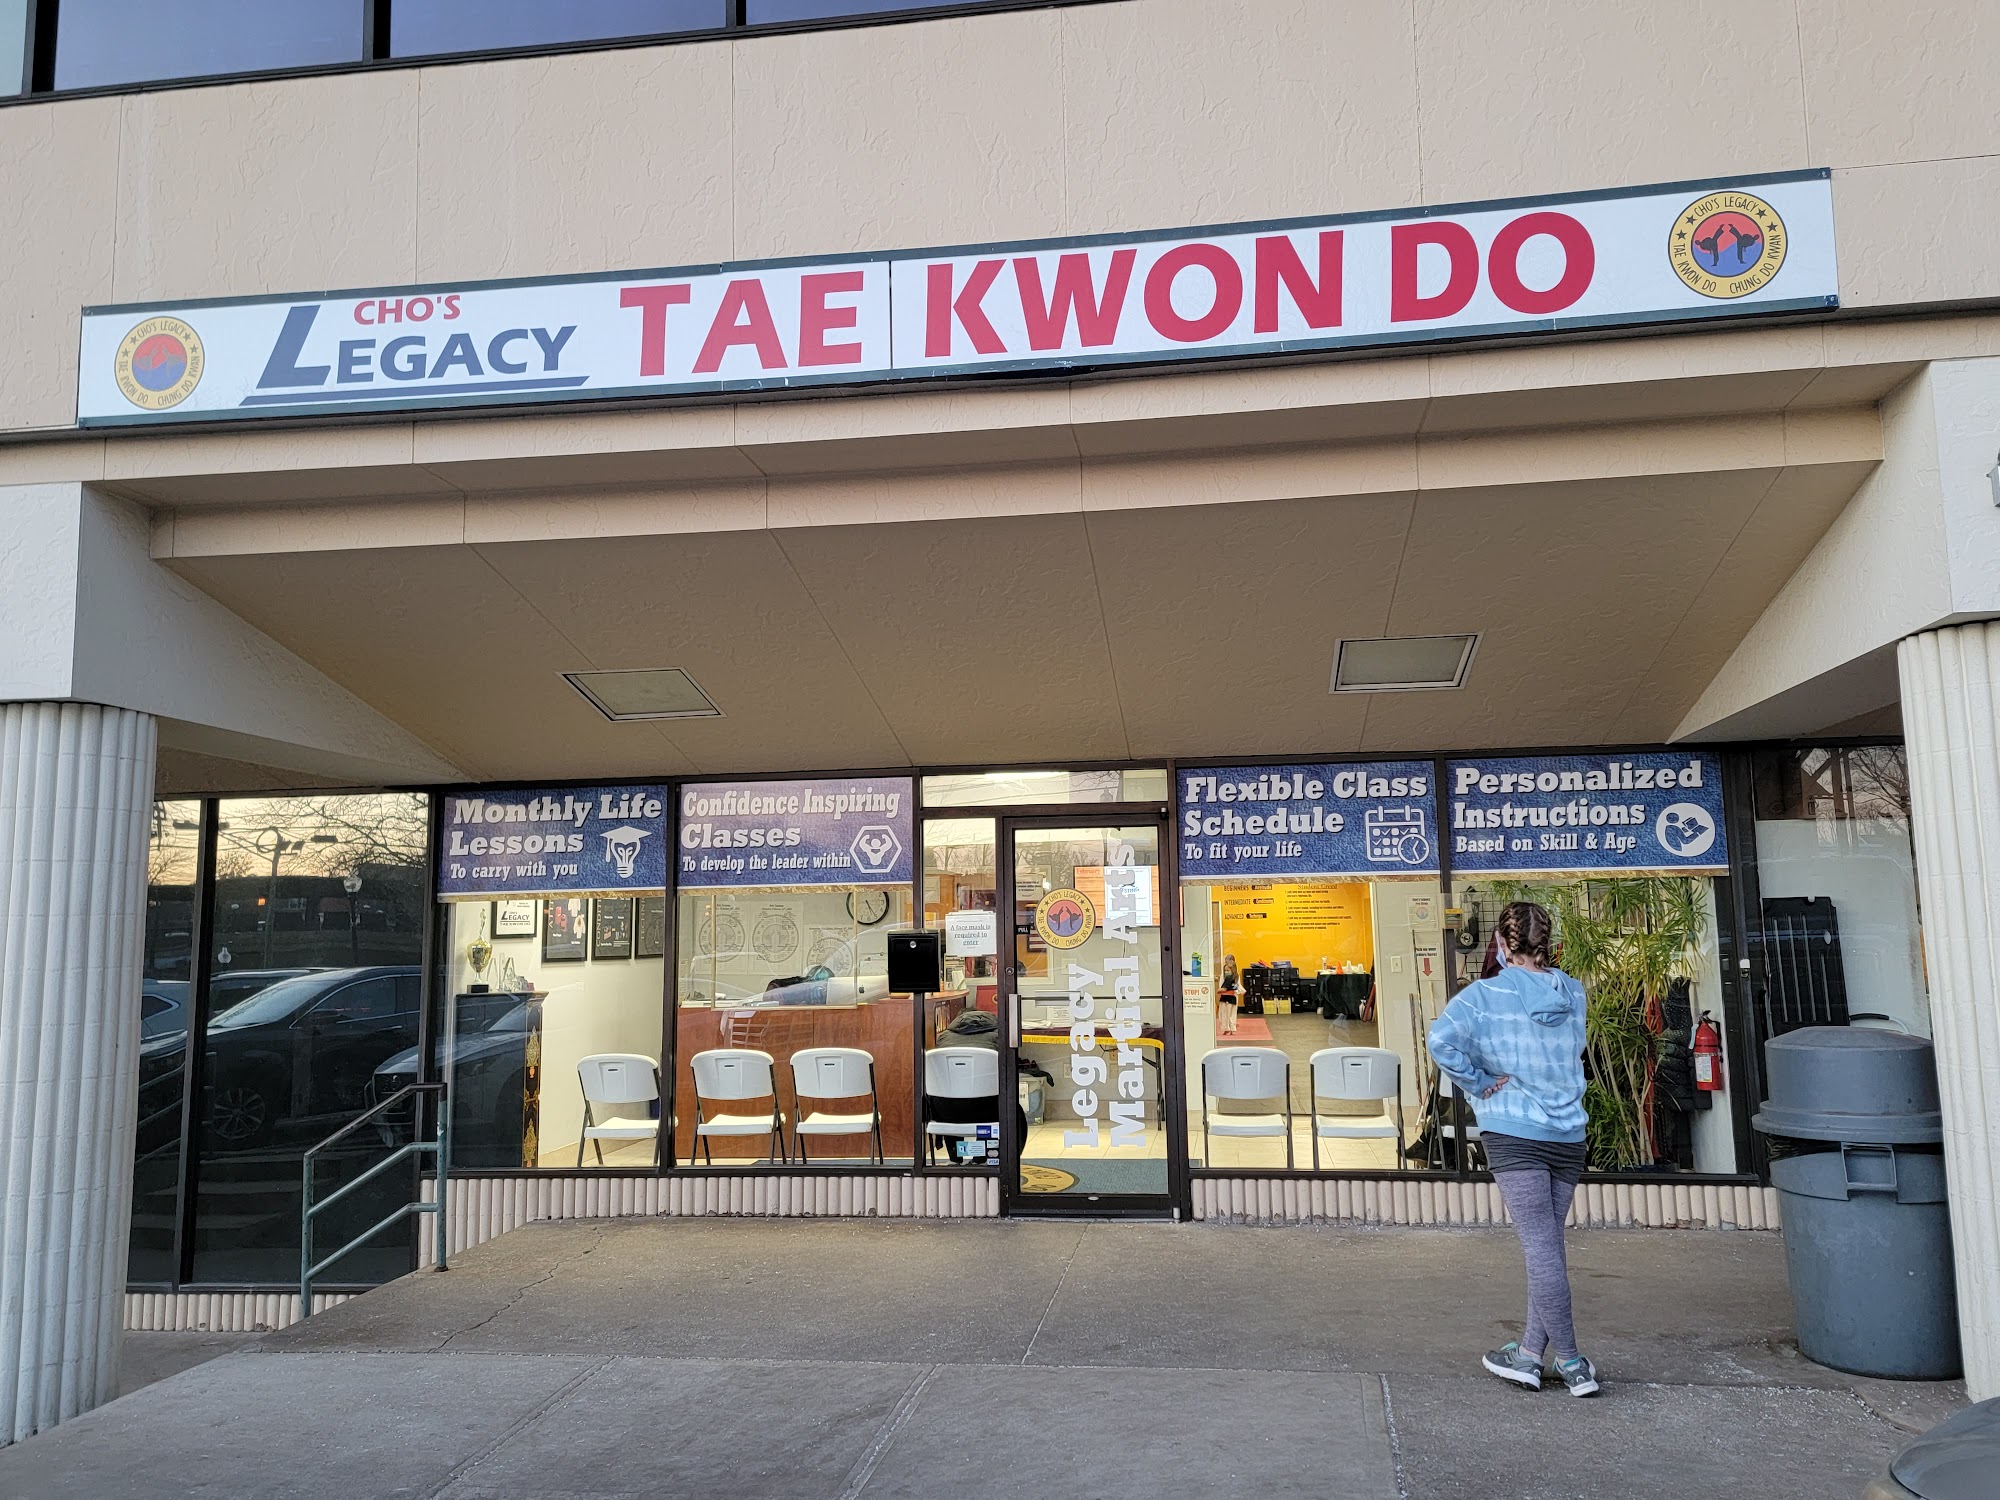 Cho's Legacy TKD Martial Arts 736 Speedwell Ave #4, Morris Plains New Jersey 07950